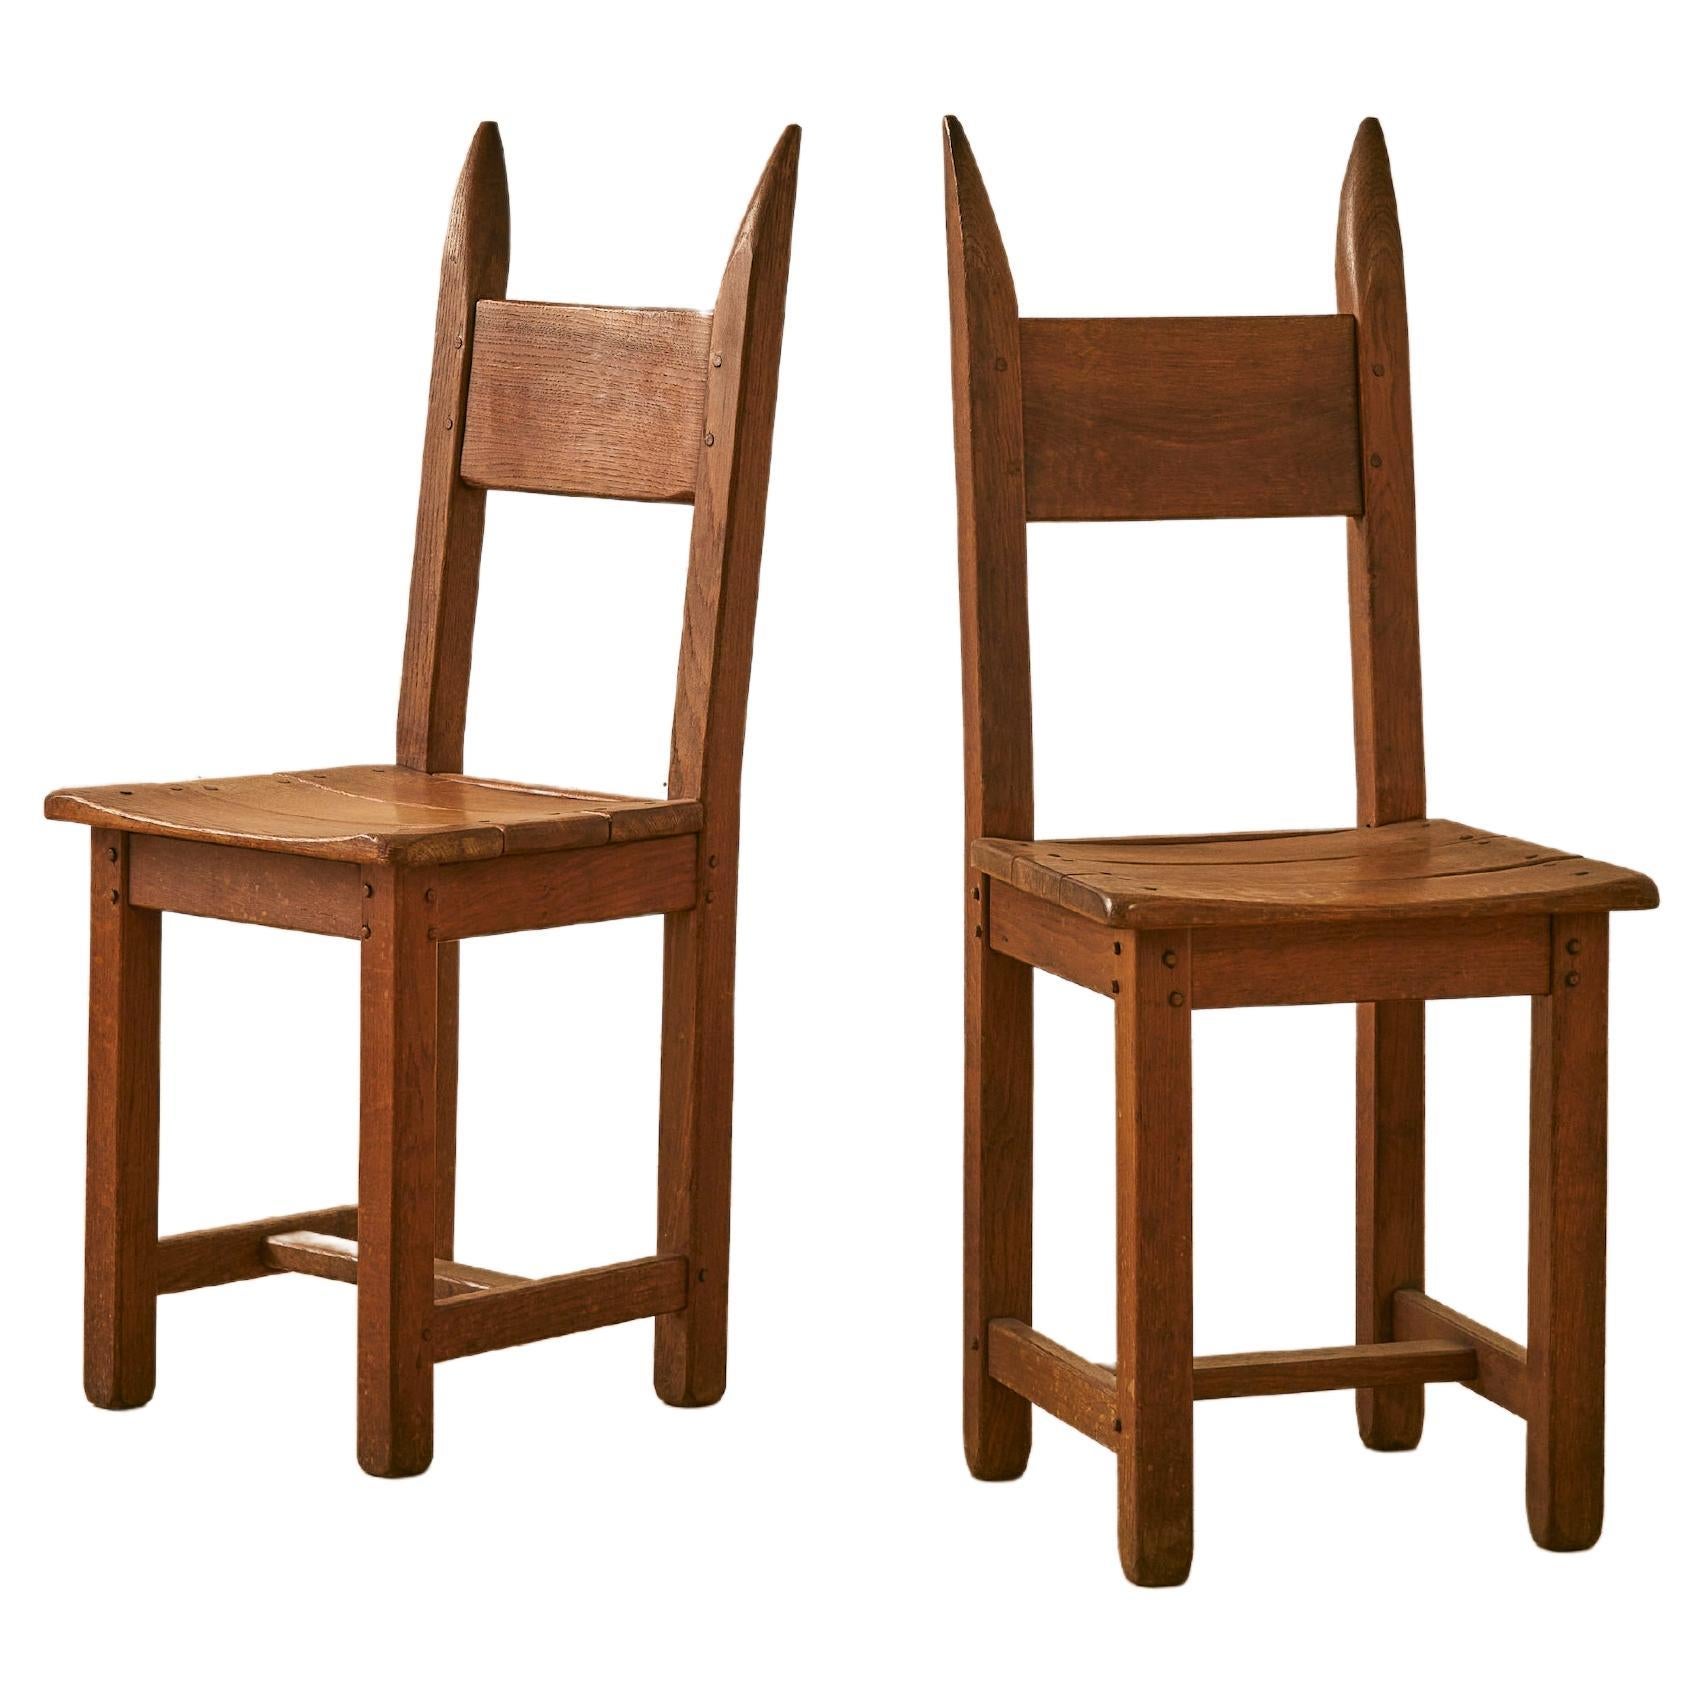 Pair of Wooden Swiss Chalet Chairs